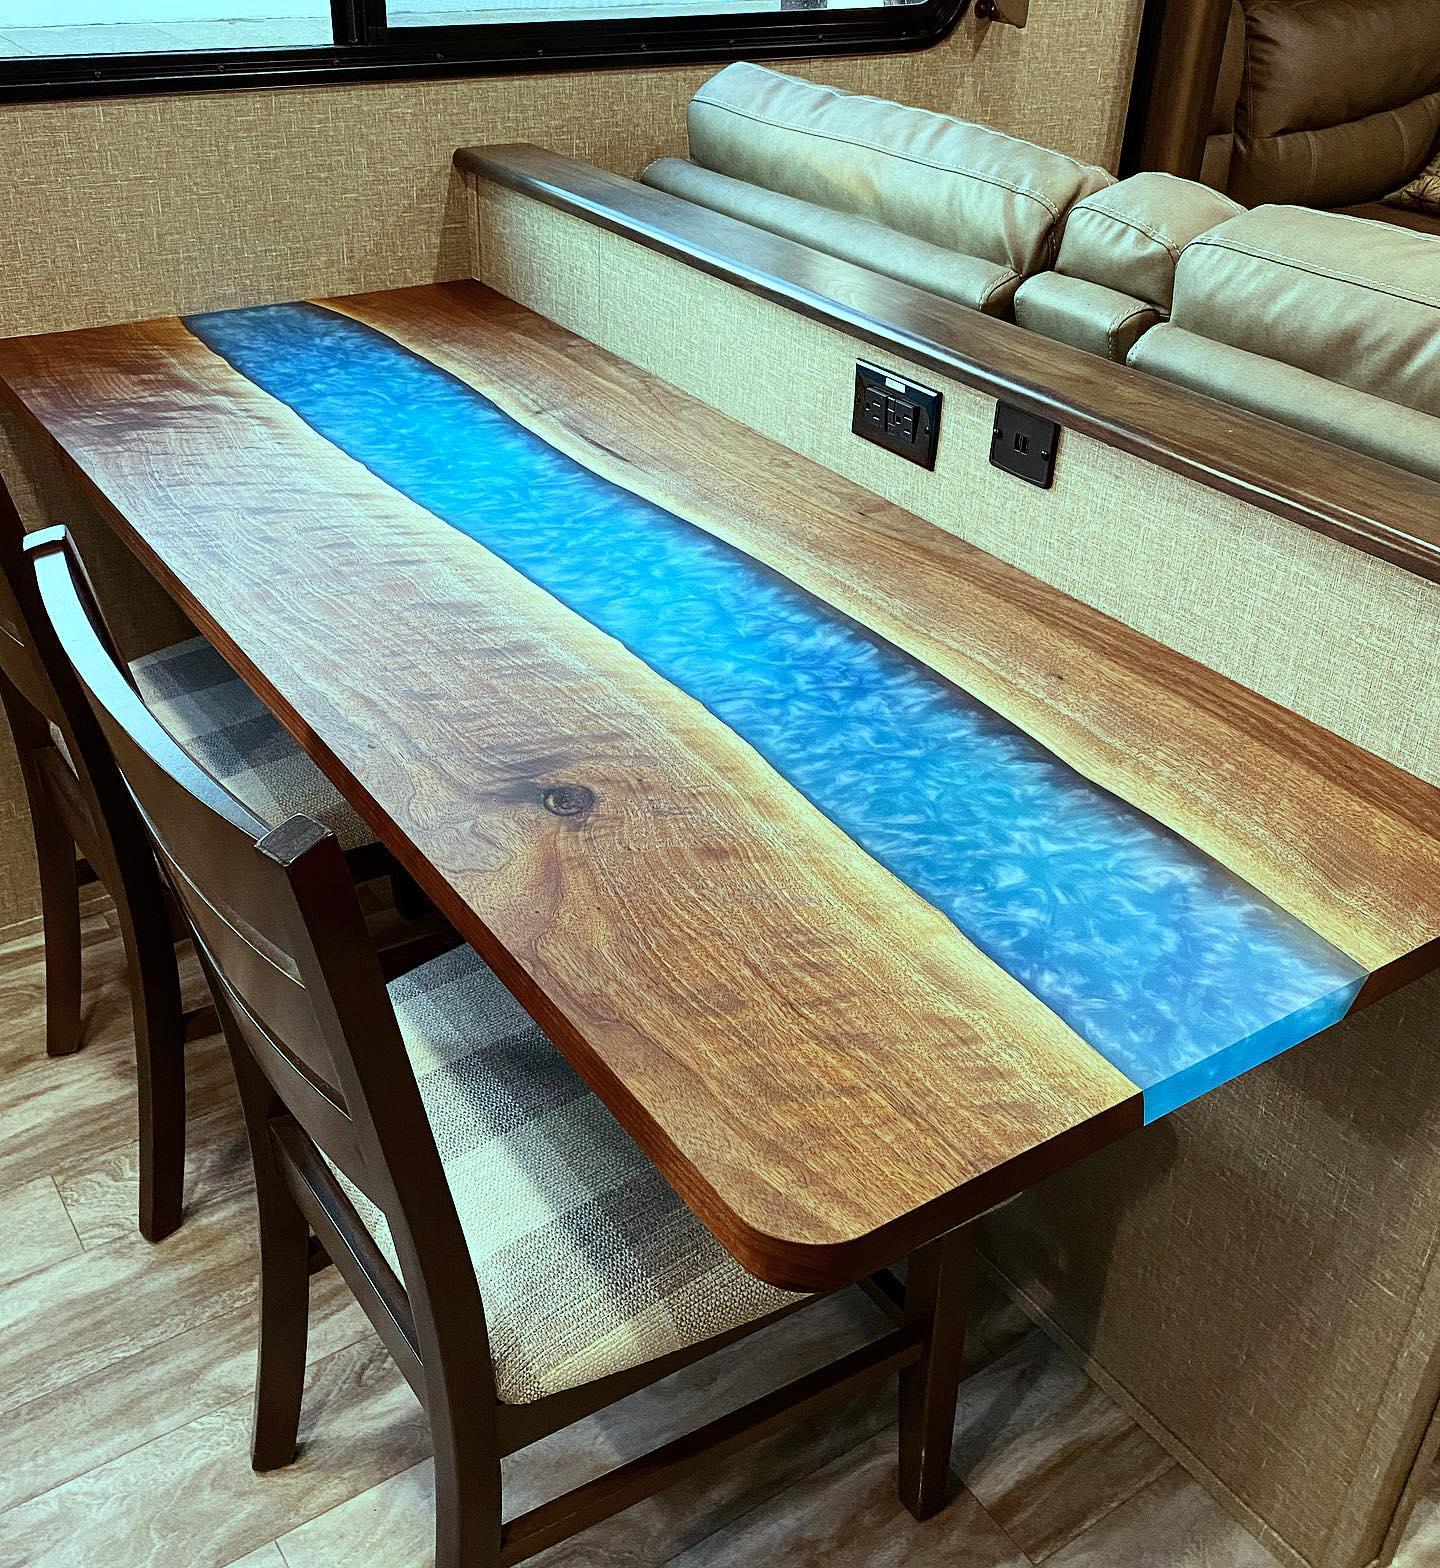 Elevate your home décor with our elegant epoxy coffee tables. Goodview Woodworks crafts these tables with precision and creativity, combining wood and epoxy resin to create unique and functional coffee table designs that capture attention and admiration.